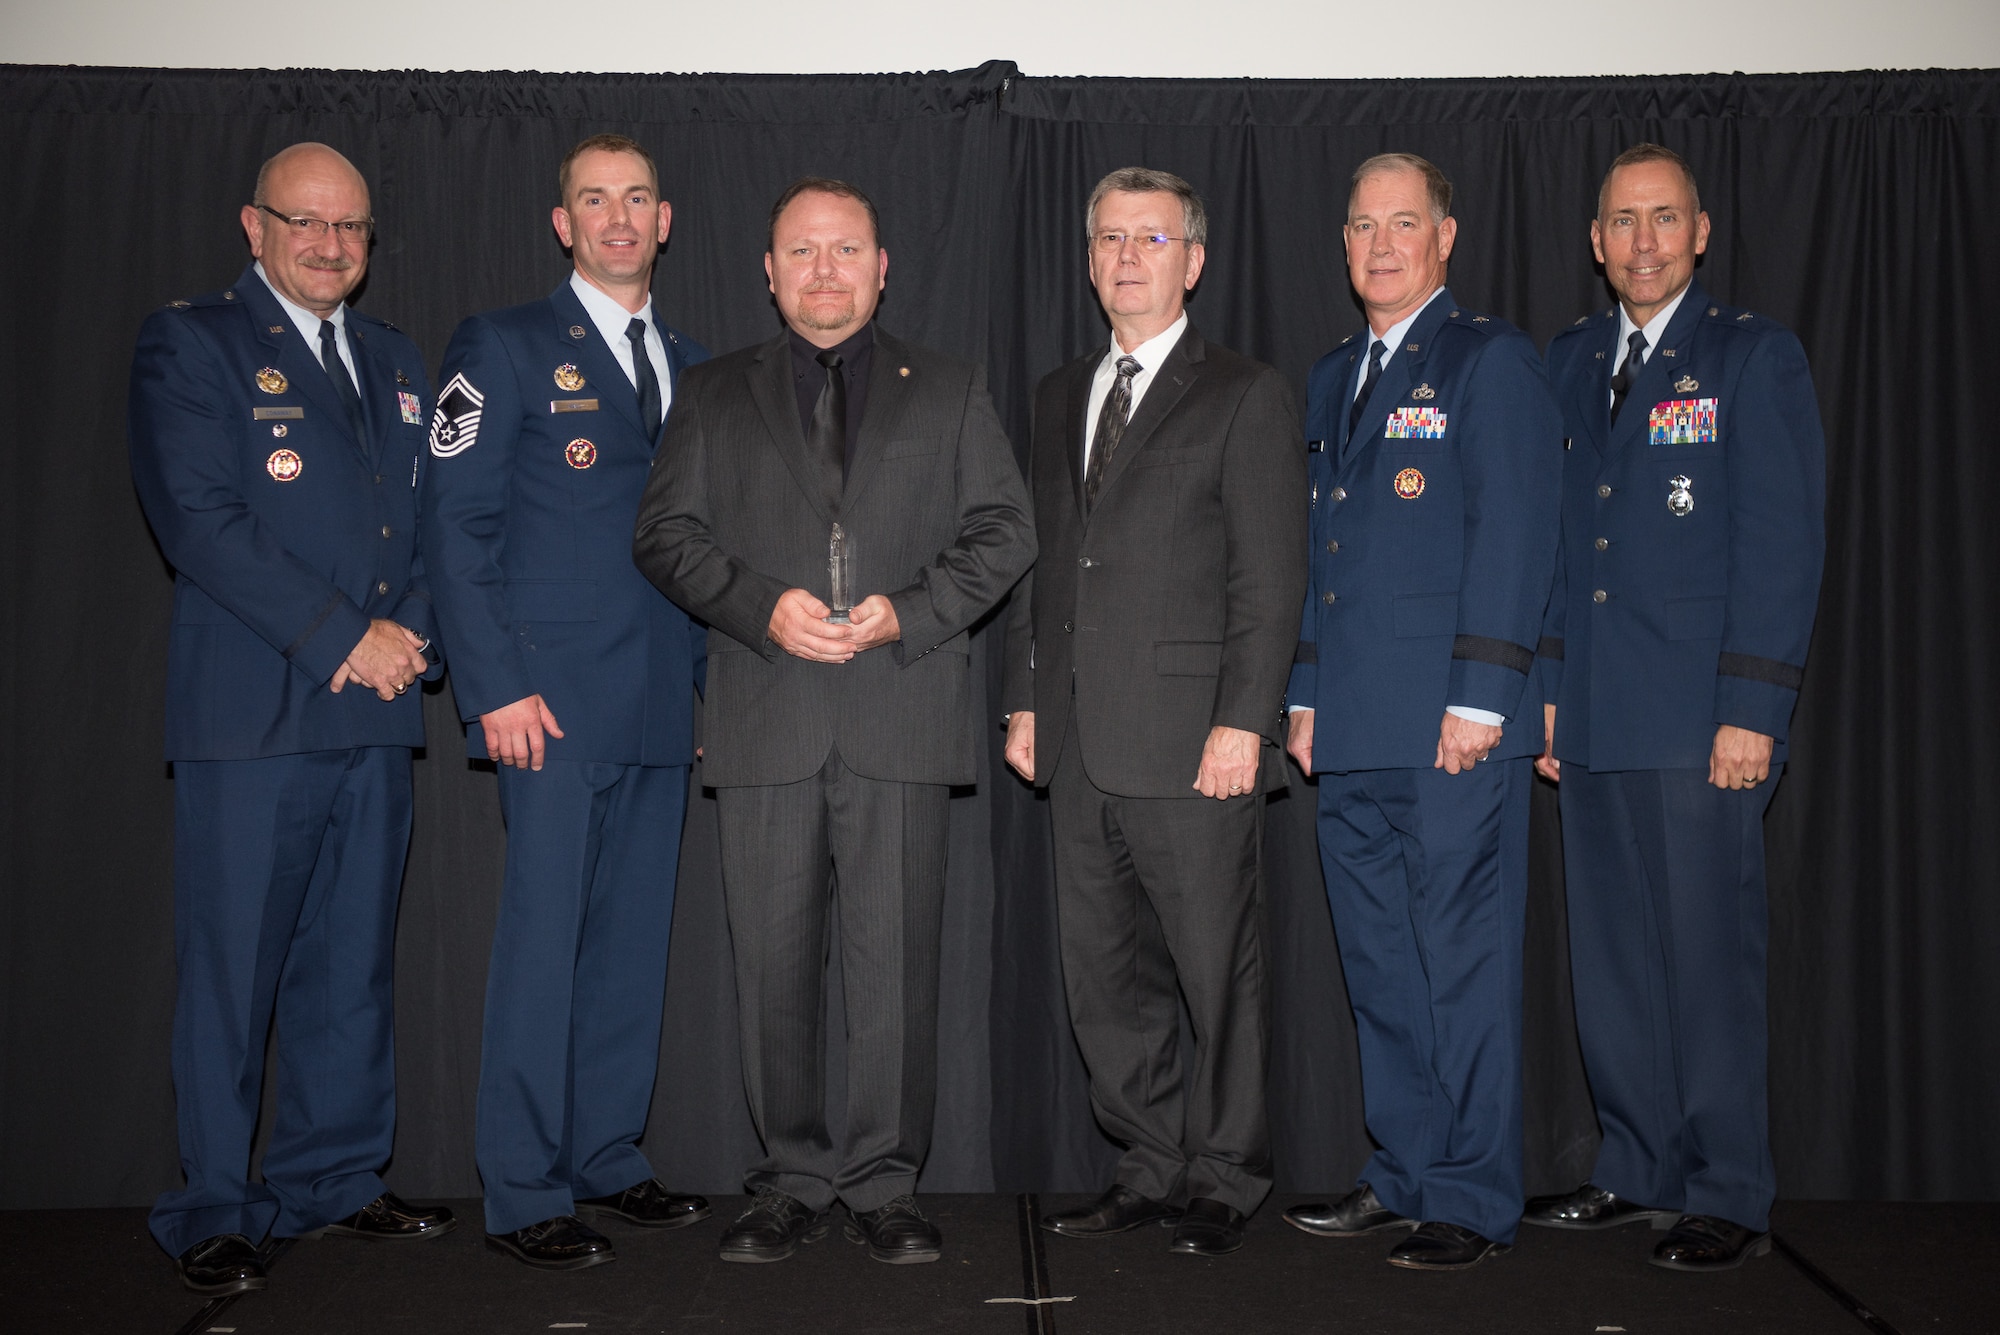 Shane Braziel, National Guard Bureau/Air National Guard Security Forces Division, Joint Base Andrews, Maryland, receives the Air National Guard Higher Headquarters Staff Civilian of 2017 Award at the 2018 Air National Guard Security Forces Squadron Dinner and Awards Banquet at the National Center for Employee Development Conference Center in Norman, Oklahoma, Sept. 12, 2018. Every year, leadership from all of the Air National Guard security forces squadrons meet in one place to discuss past, current and upcoming topics that impact the career field, as well as recognize outstanding security forces Airmen. (U.S. Air National Guard Photo by Staff Sgt. Kasey M. Phipps)